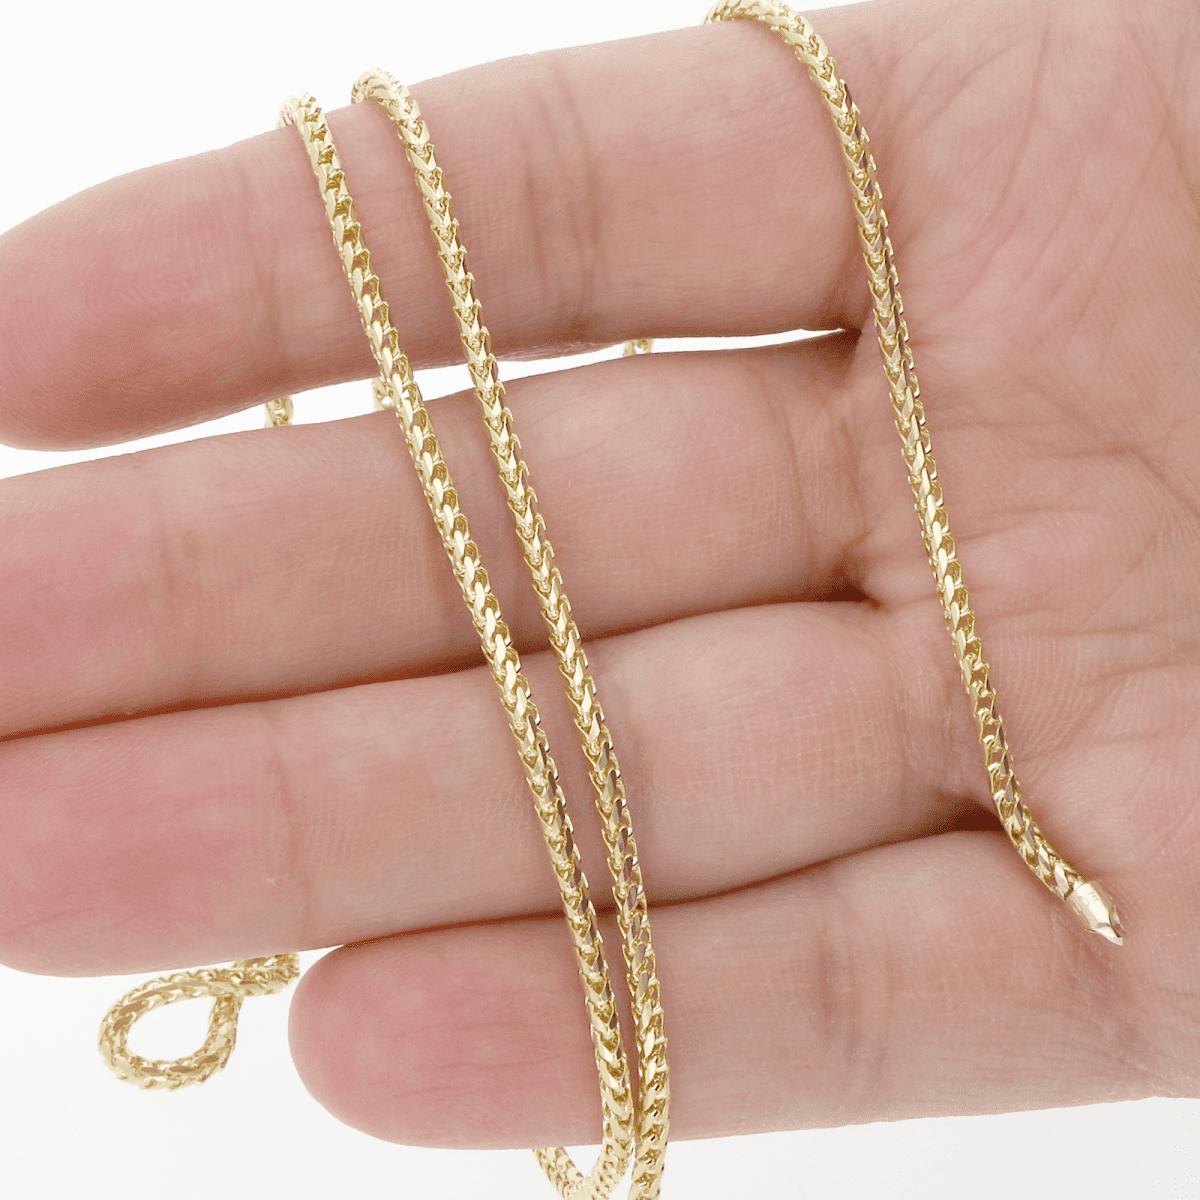 Solid 14K Yellow Gold 2mm Franco Chain Necklace 22″ 24″ 26″ 28″ HEAVY